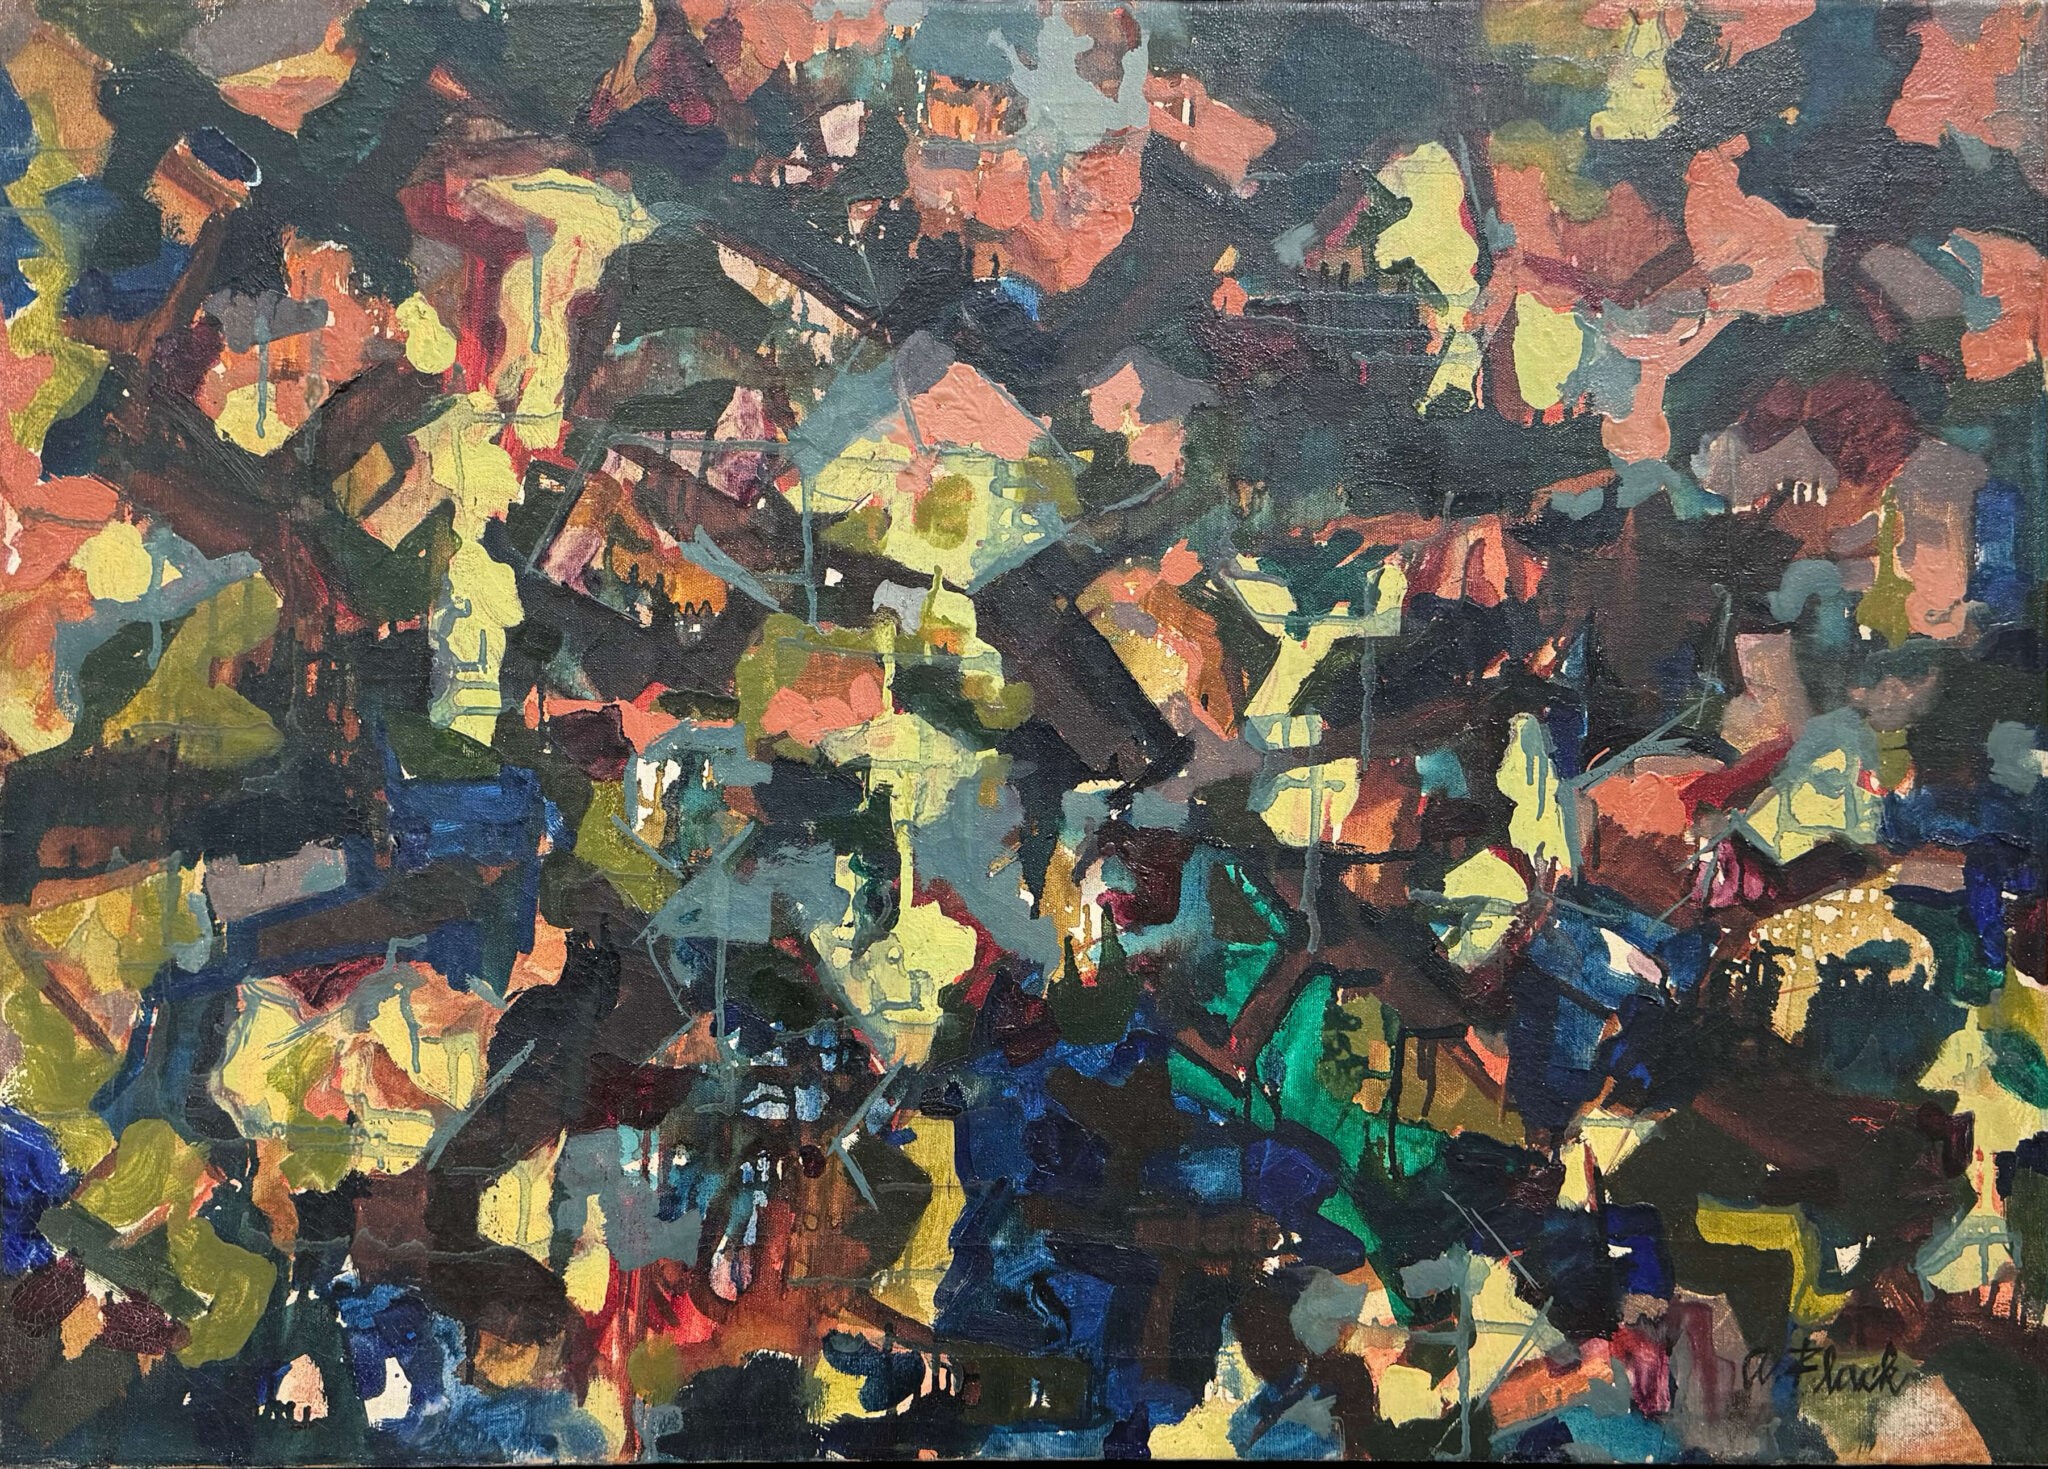 Audrey Flack's "Untitled" from Yellow Diamond series (1951, oil on canvas, 24" x 34") on view at Southampton Arts Center.